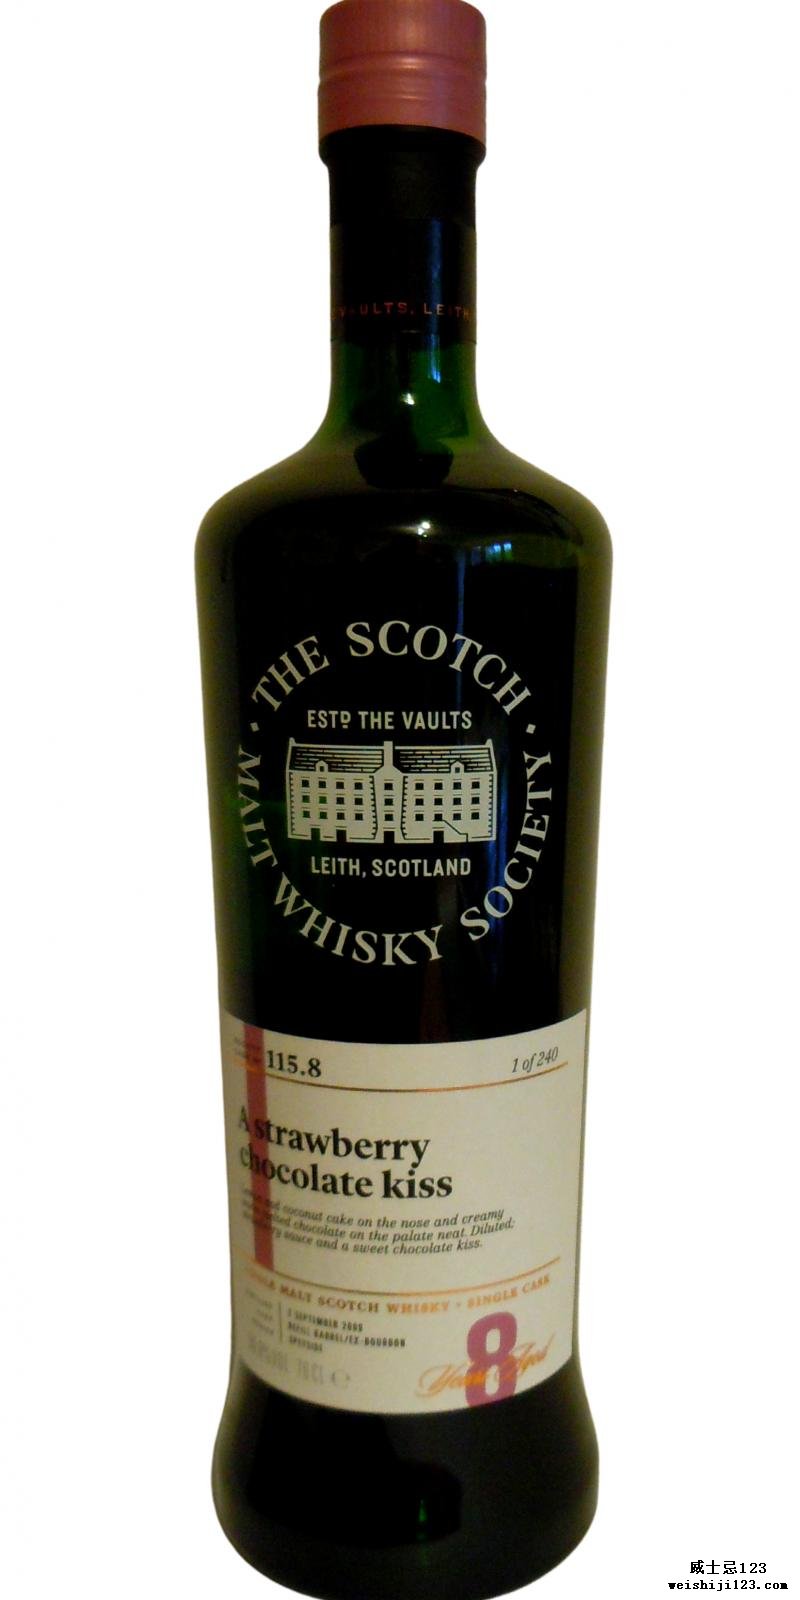 An Cnoc 2009 SMWS 115.8